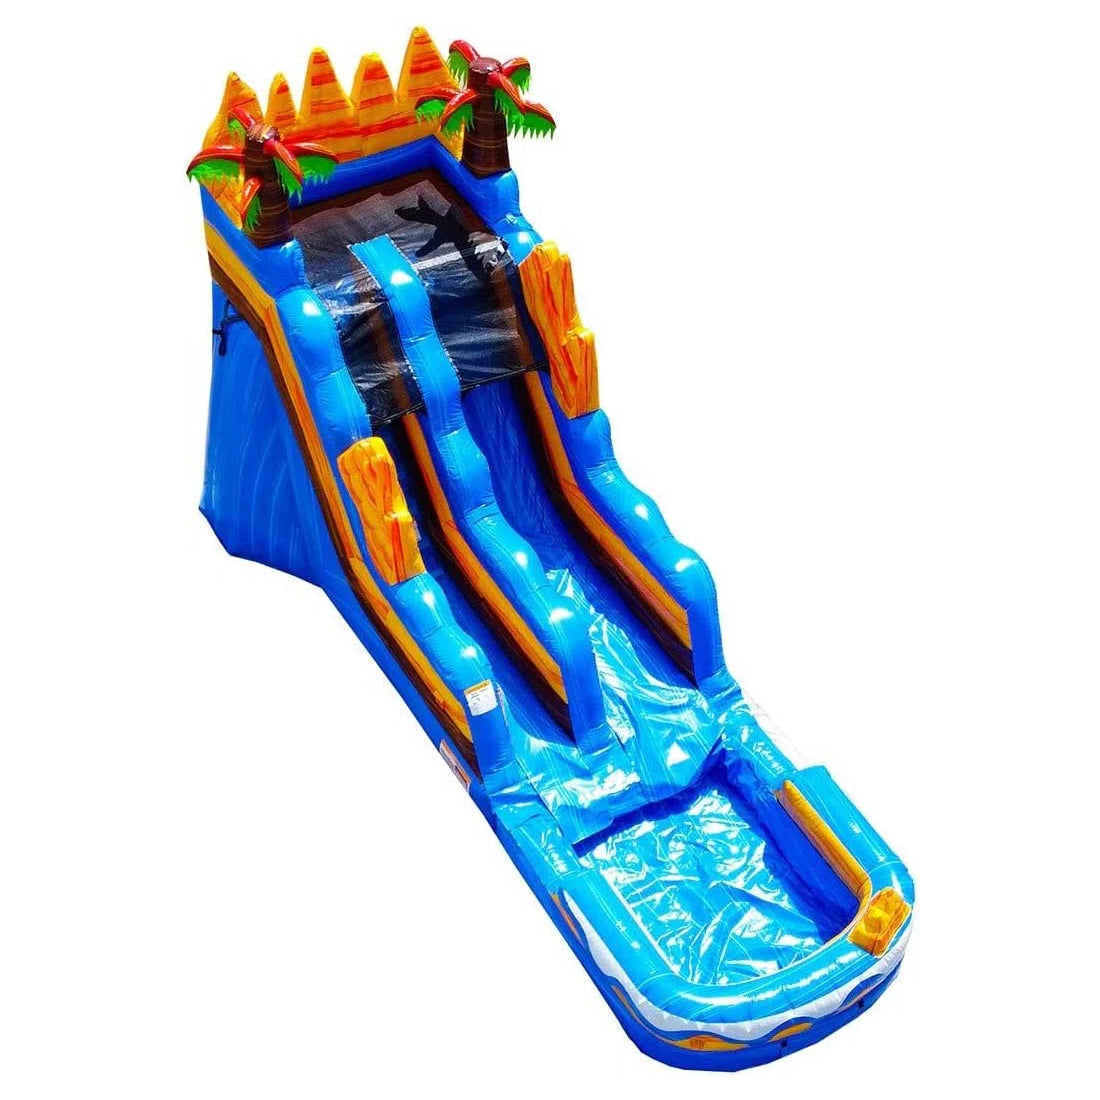 Oasis Commercial Grade Water Slide With Pool Splash Inflatable Slide Bouncer For Parties